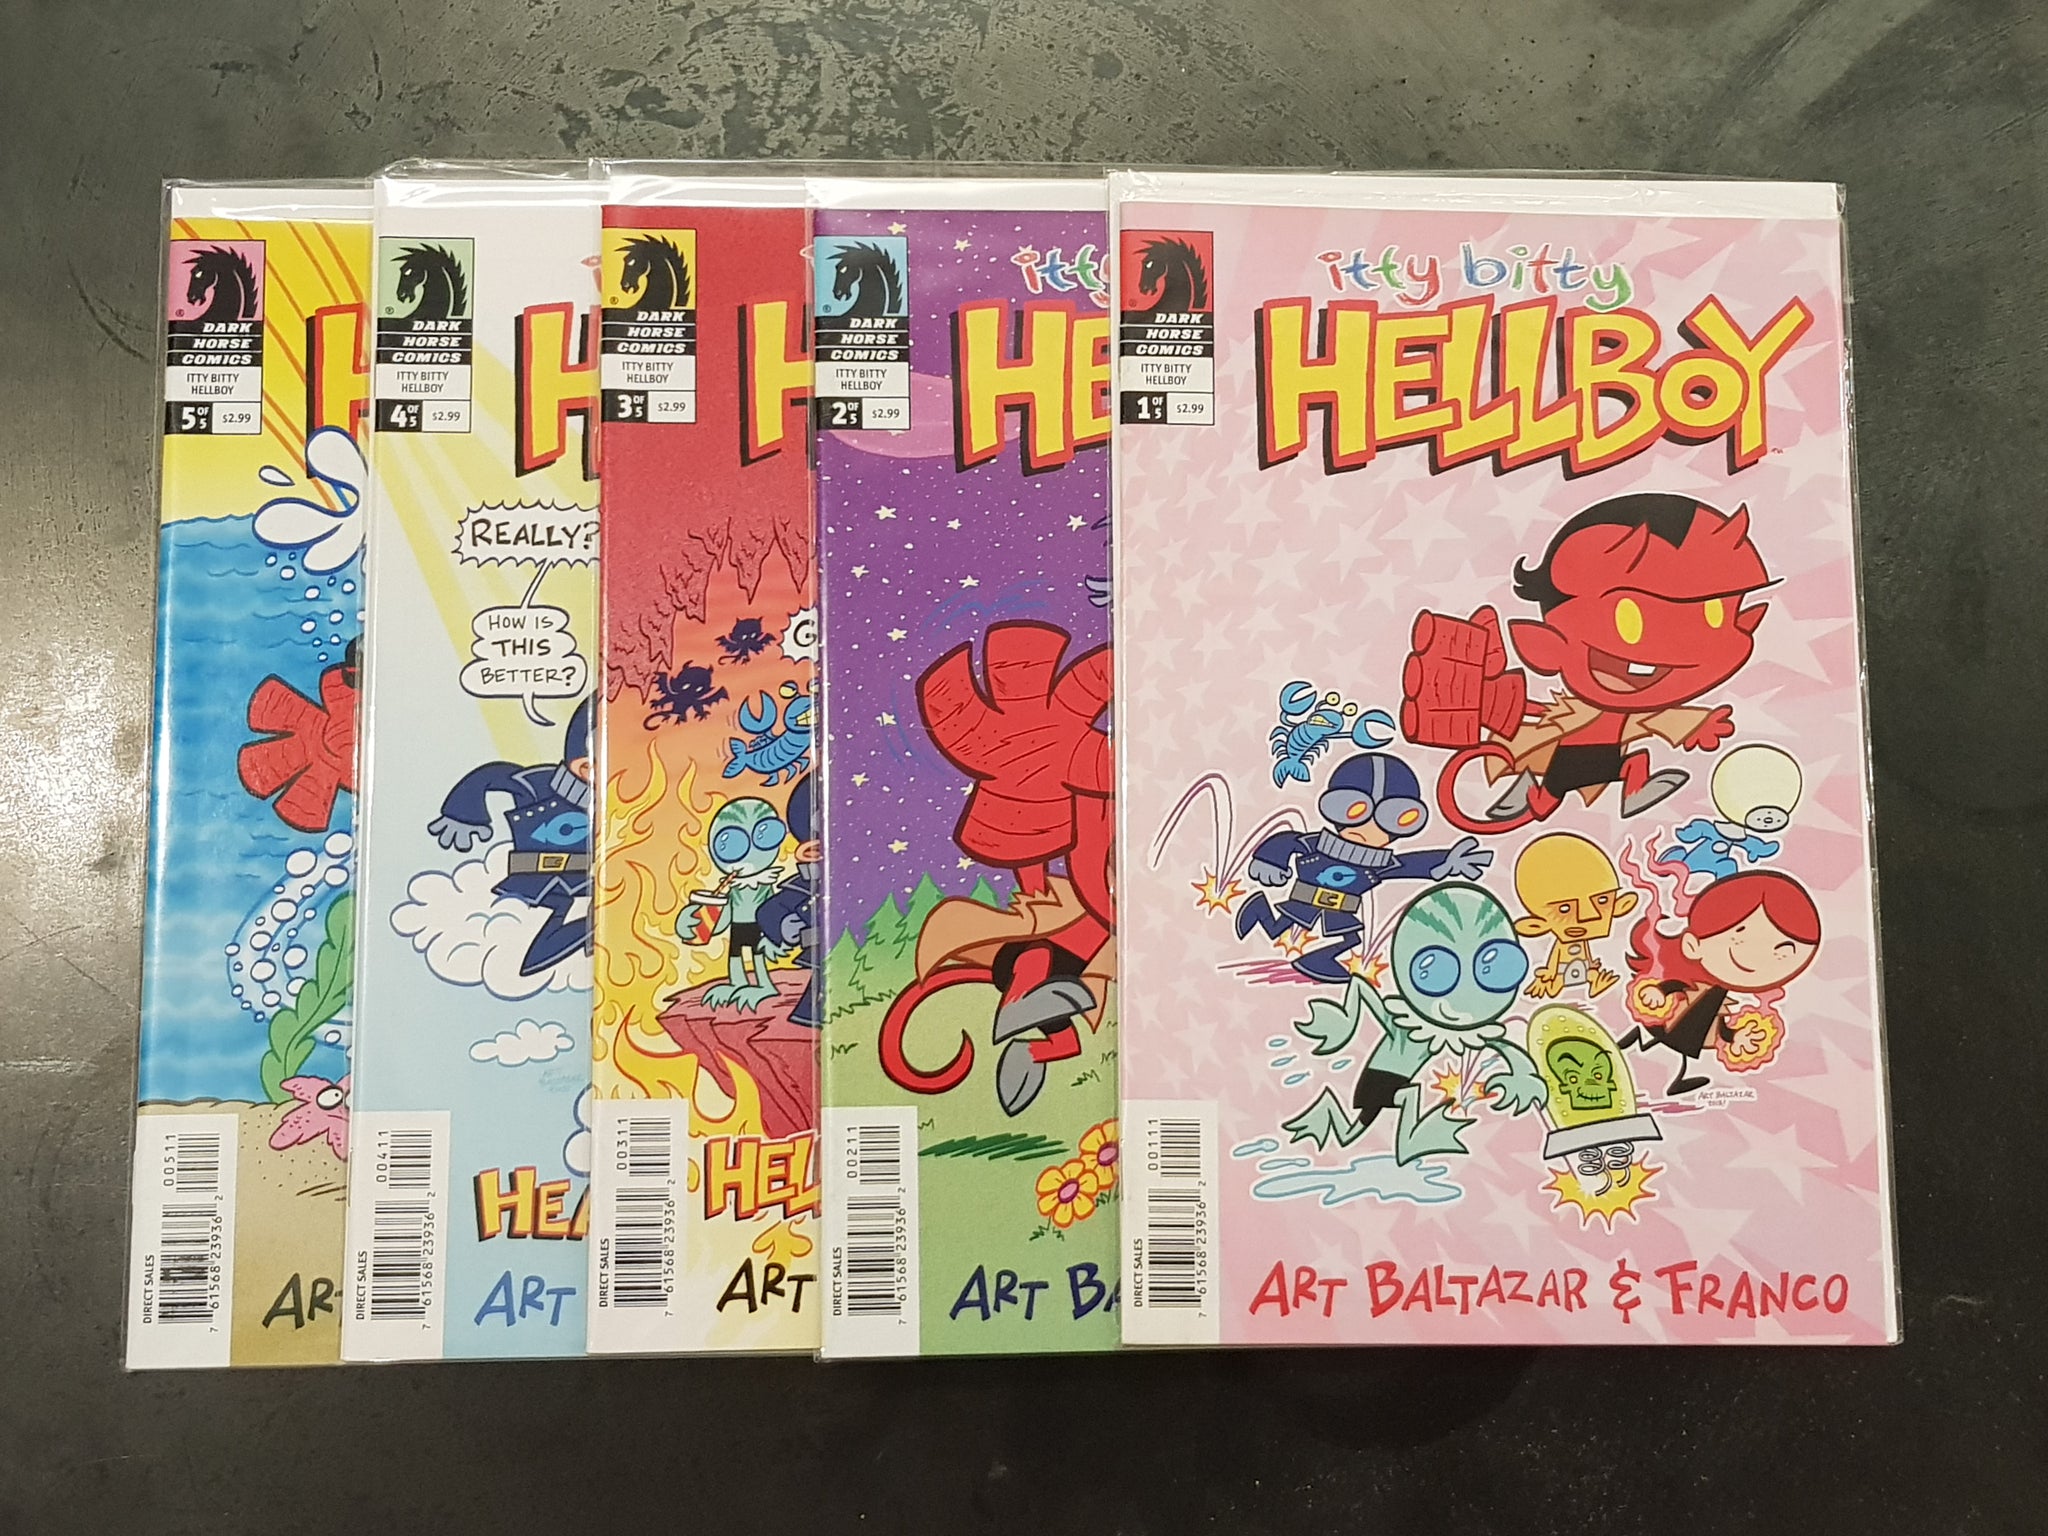 Itty Bitty Hellboy #1-4 NM Complete Set